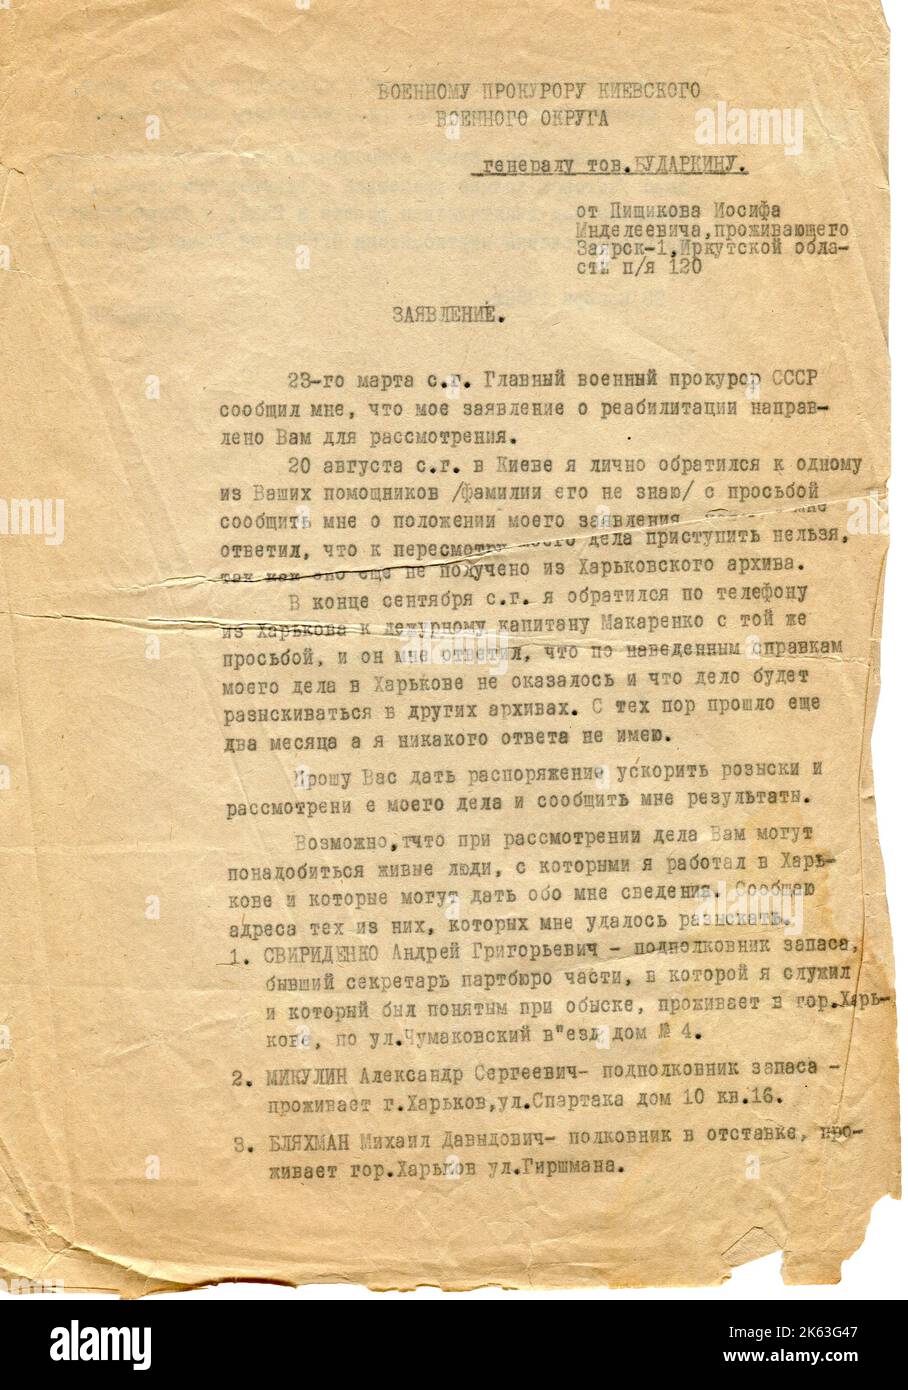 Archive of Pishchikov Iosif Mendeleevich (Russian: Пищиков Иосиф Менделеевич), born in 1905, a native of the town of Pochep, Oryol region. Jewish nationality, convicted by the Military Tribunal of the Kharkov Military District on August 11, 1937 under Articles 54-11,17-54-8 and 54-10 of the Criminal Code of the Ukrainian SSR to imprisonment for ten years. To the Military Prosecutor of the Kyiv Military District. Stock Photo